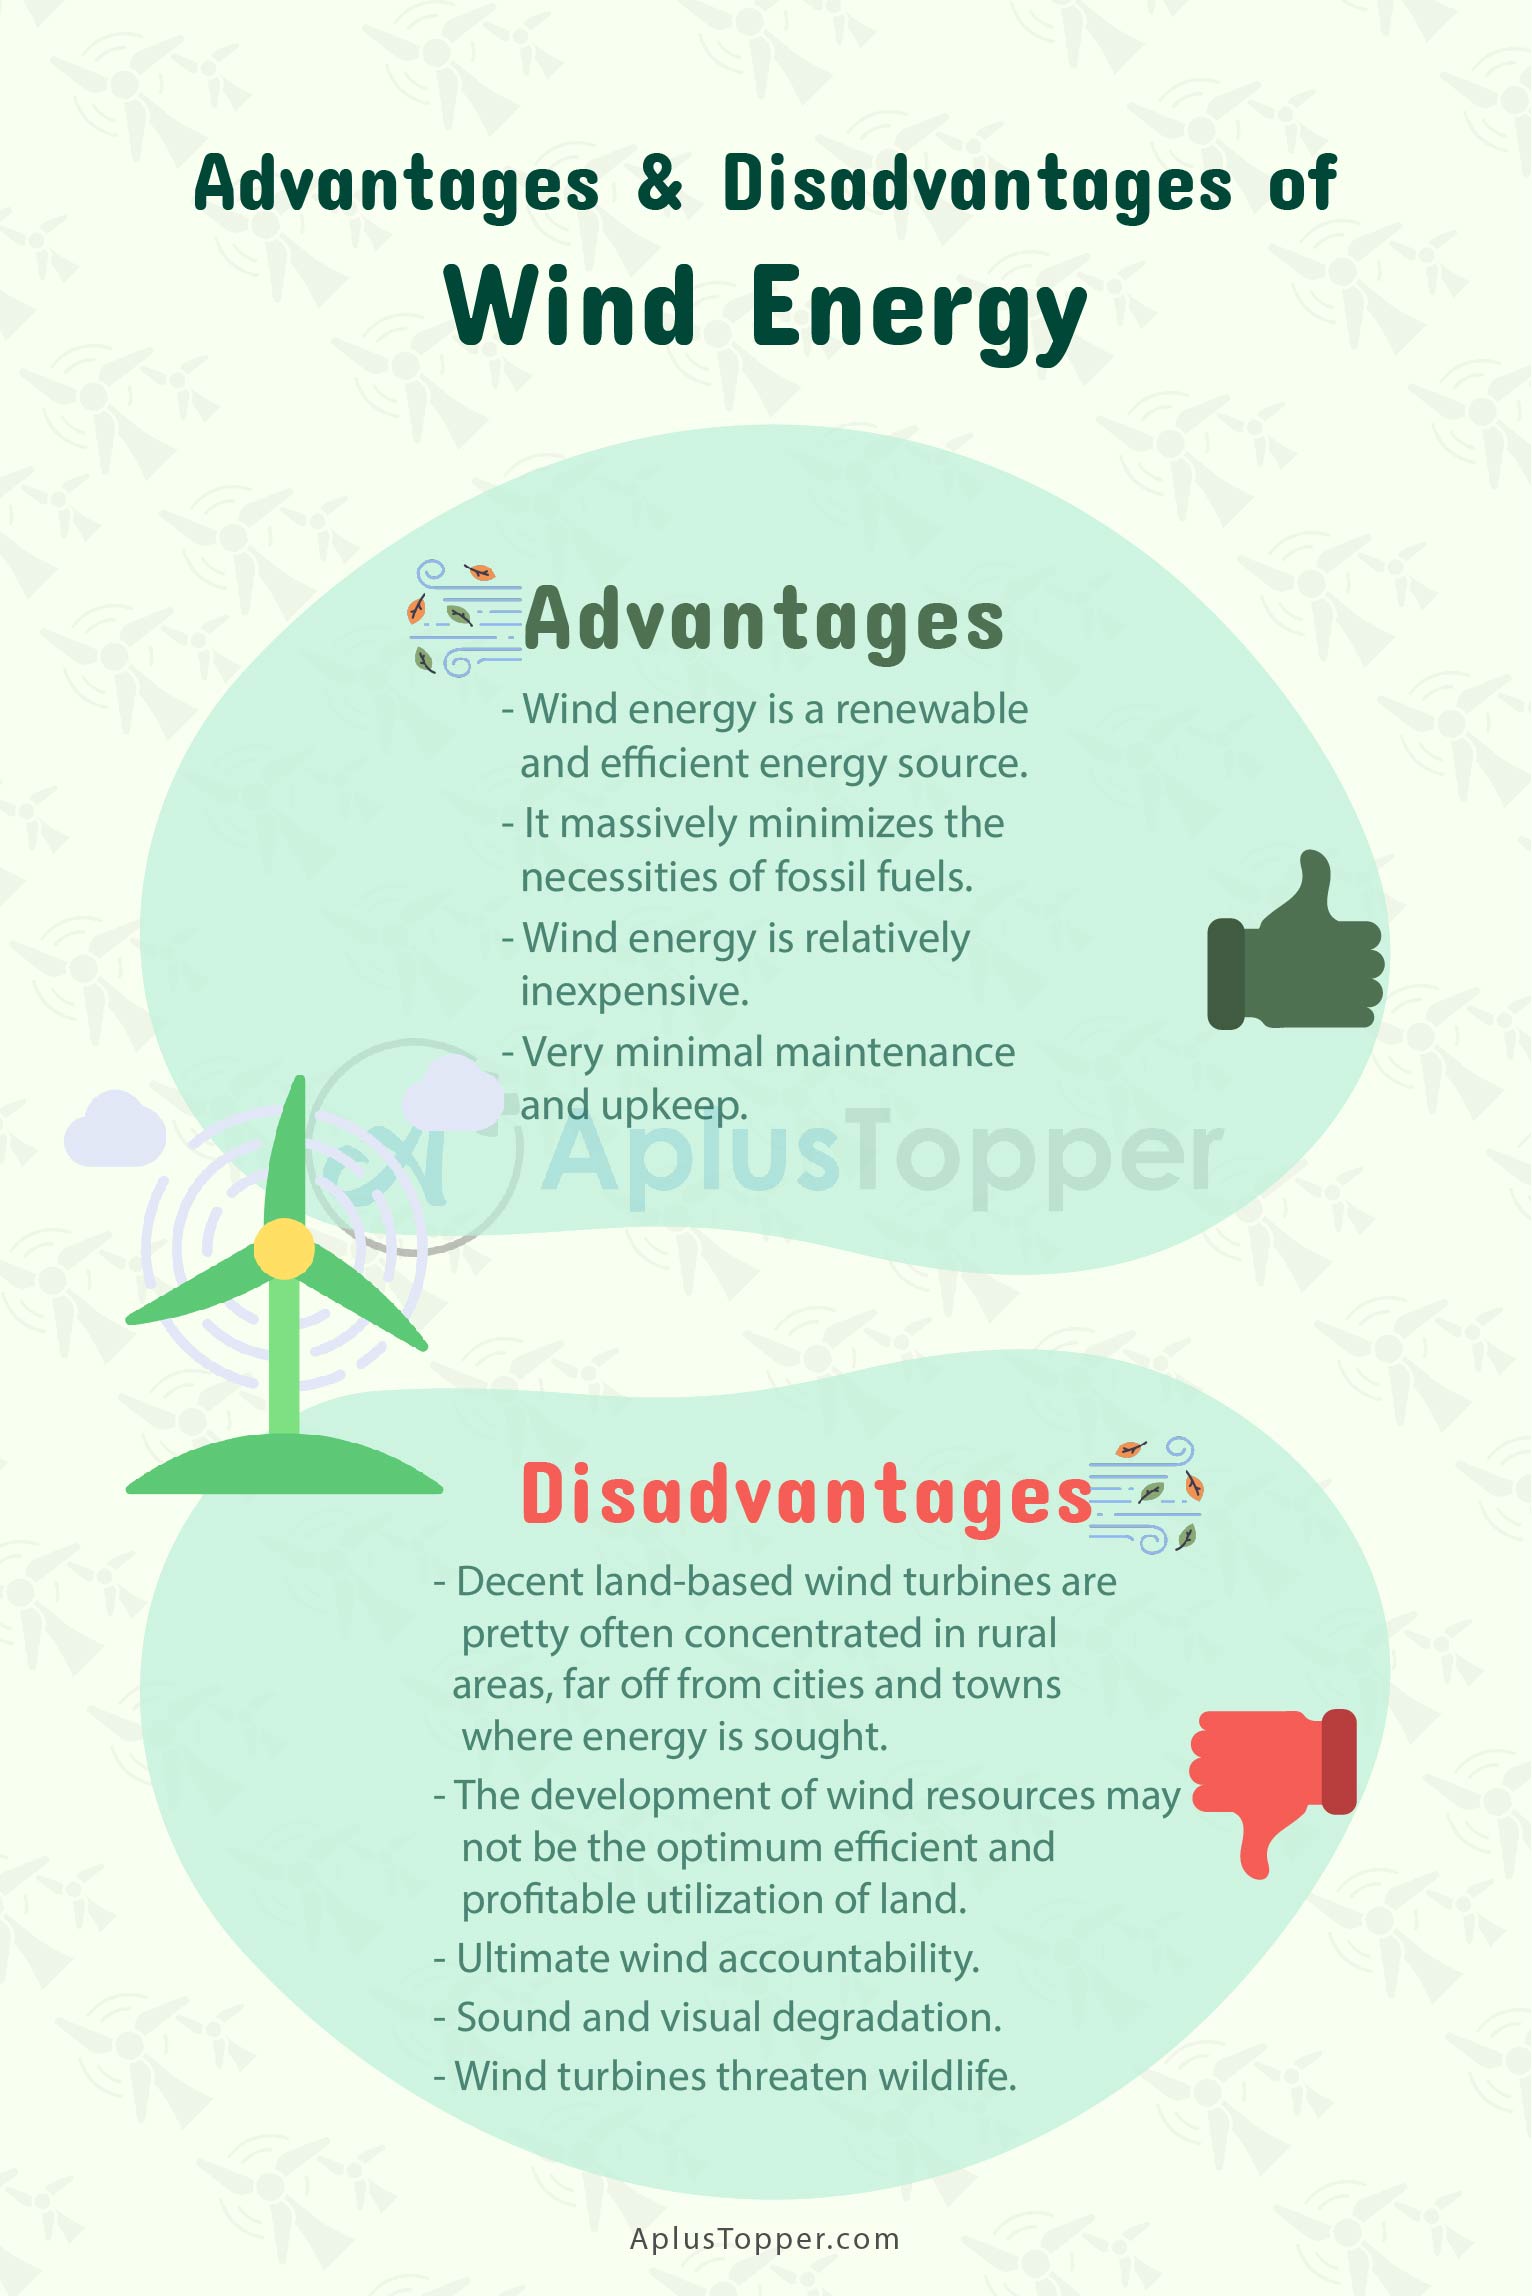 Advantages and Disadvantages of Wind Energy 2